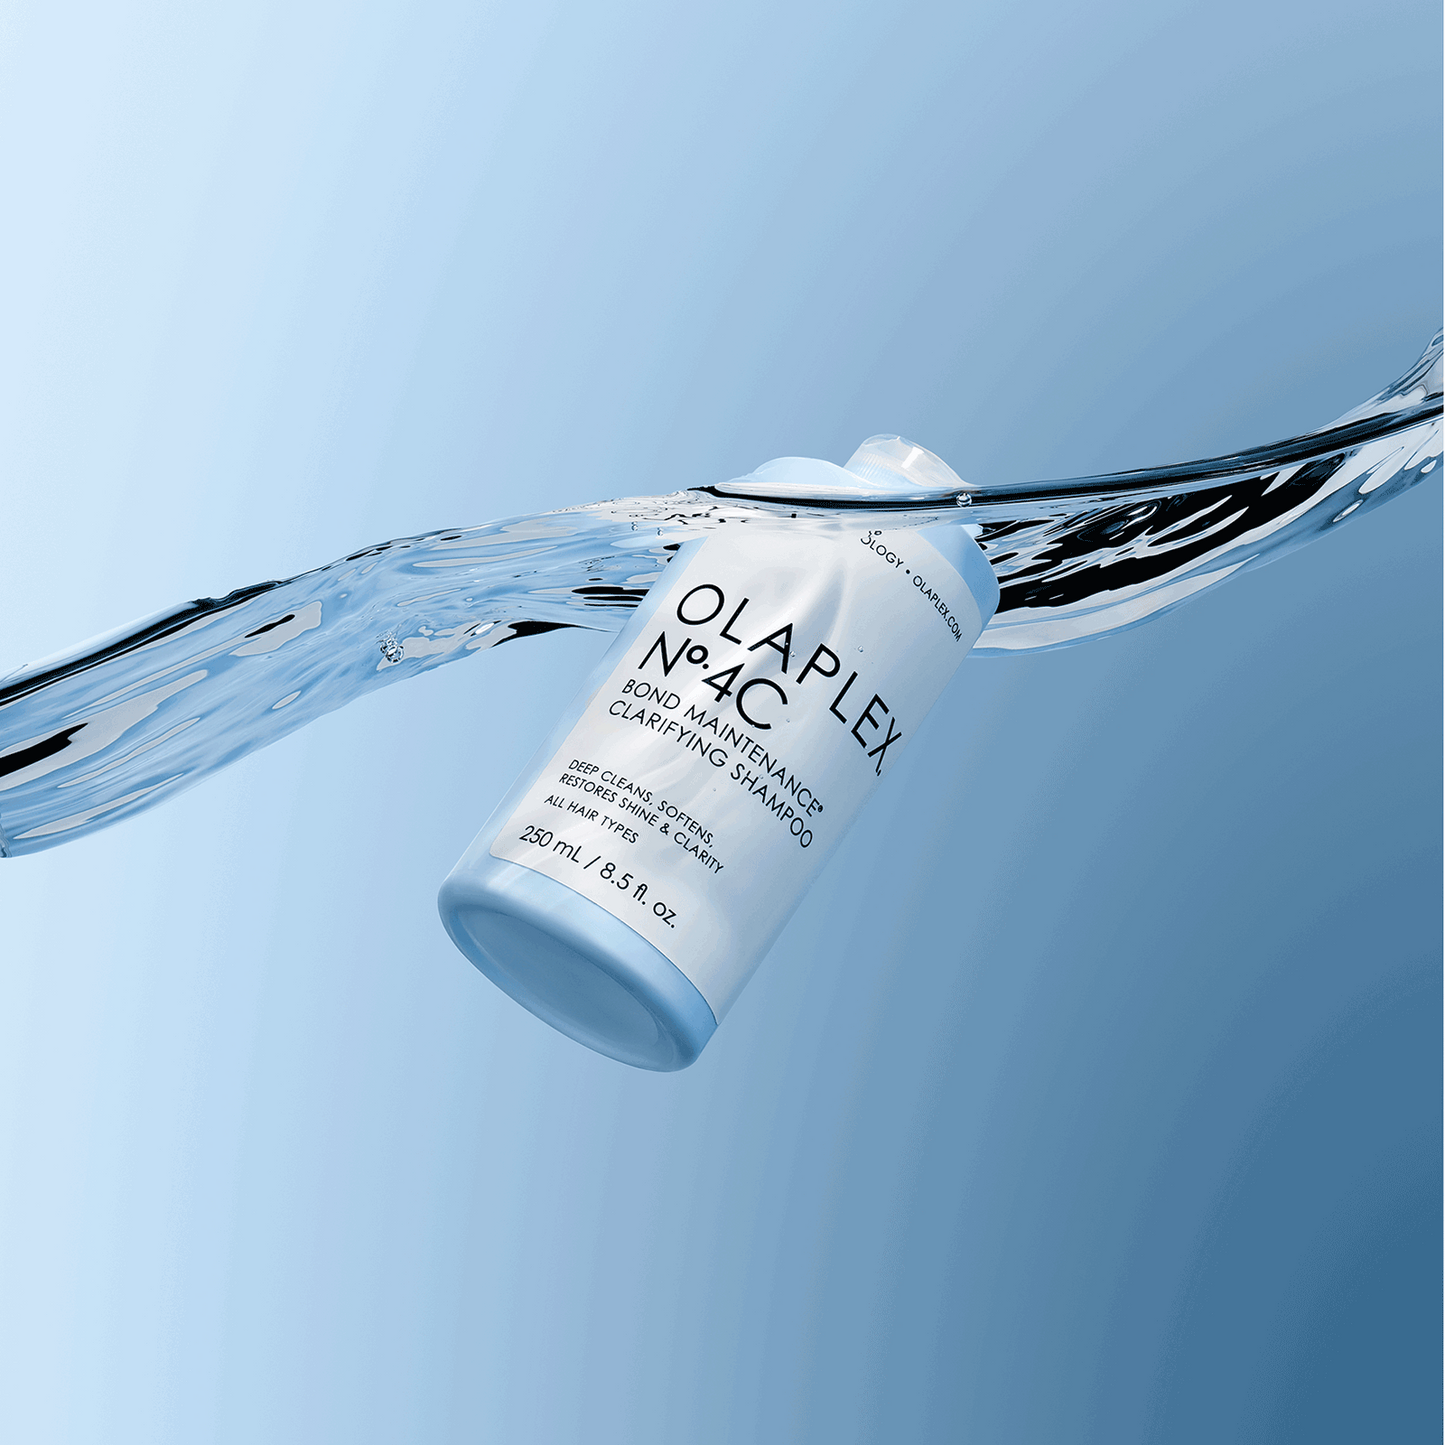 OLAPLEX No.4C Bond Maintenance Clarifying Shampoo removes daily product buildup and excess oil, then goes further with a broad-spectrum clarifying system to eliminate the widest array of damaging impurities.